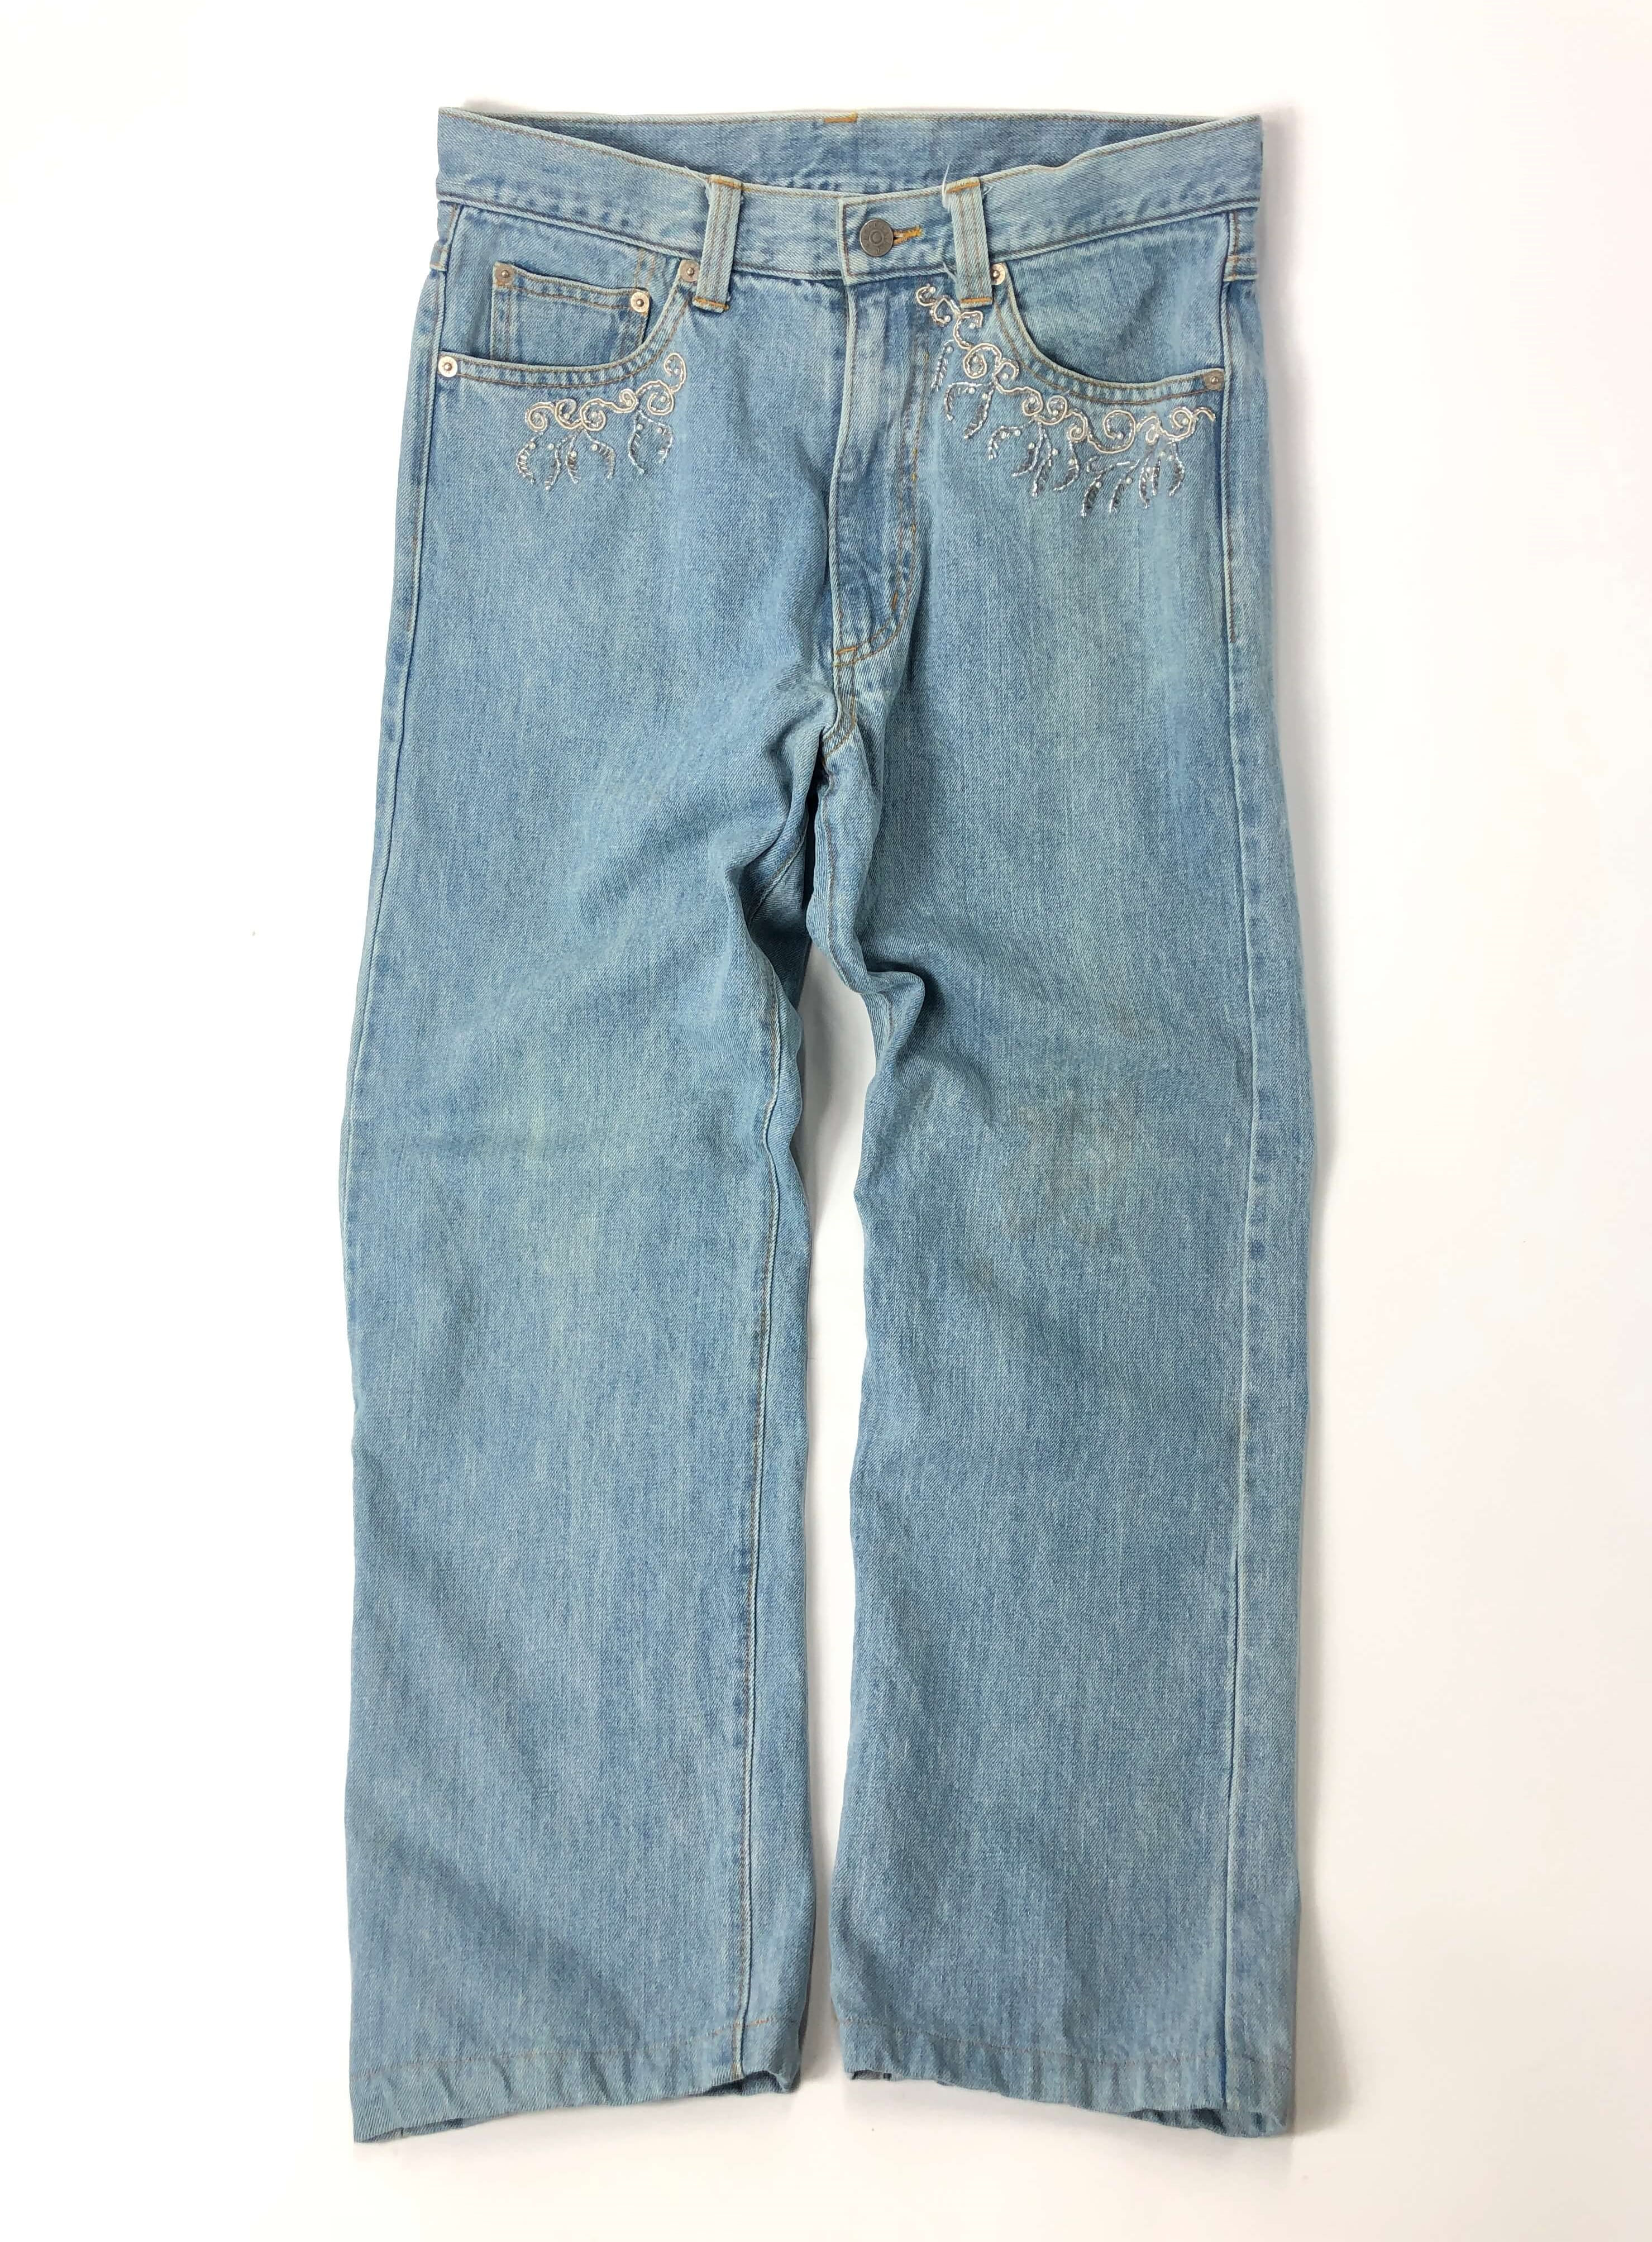 ficce jeans beads jeans